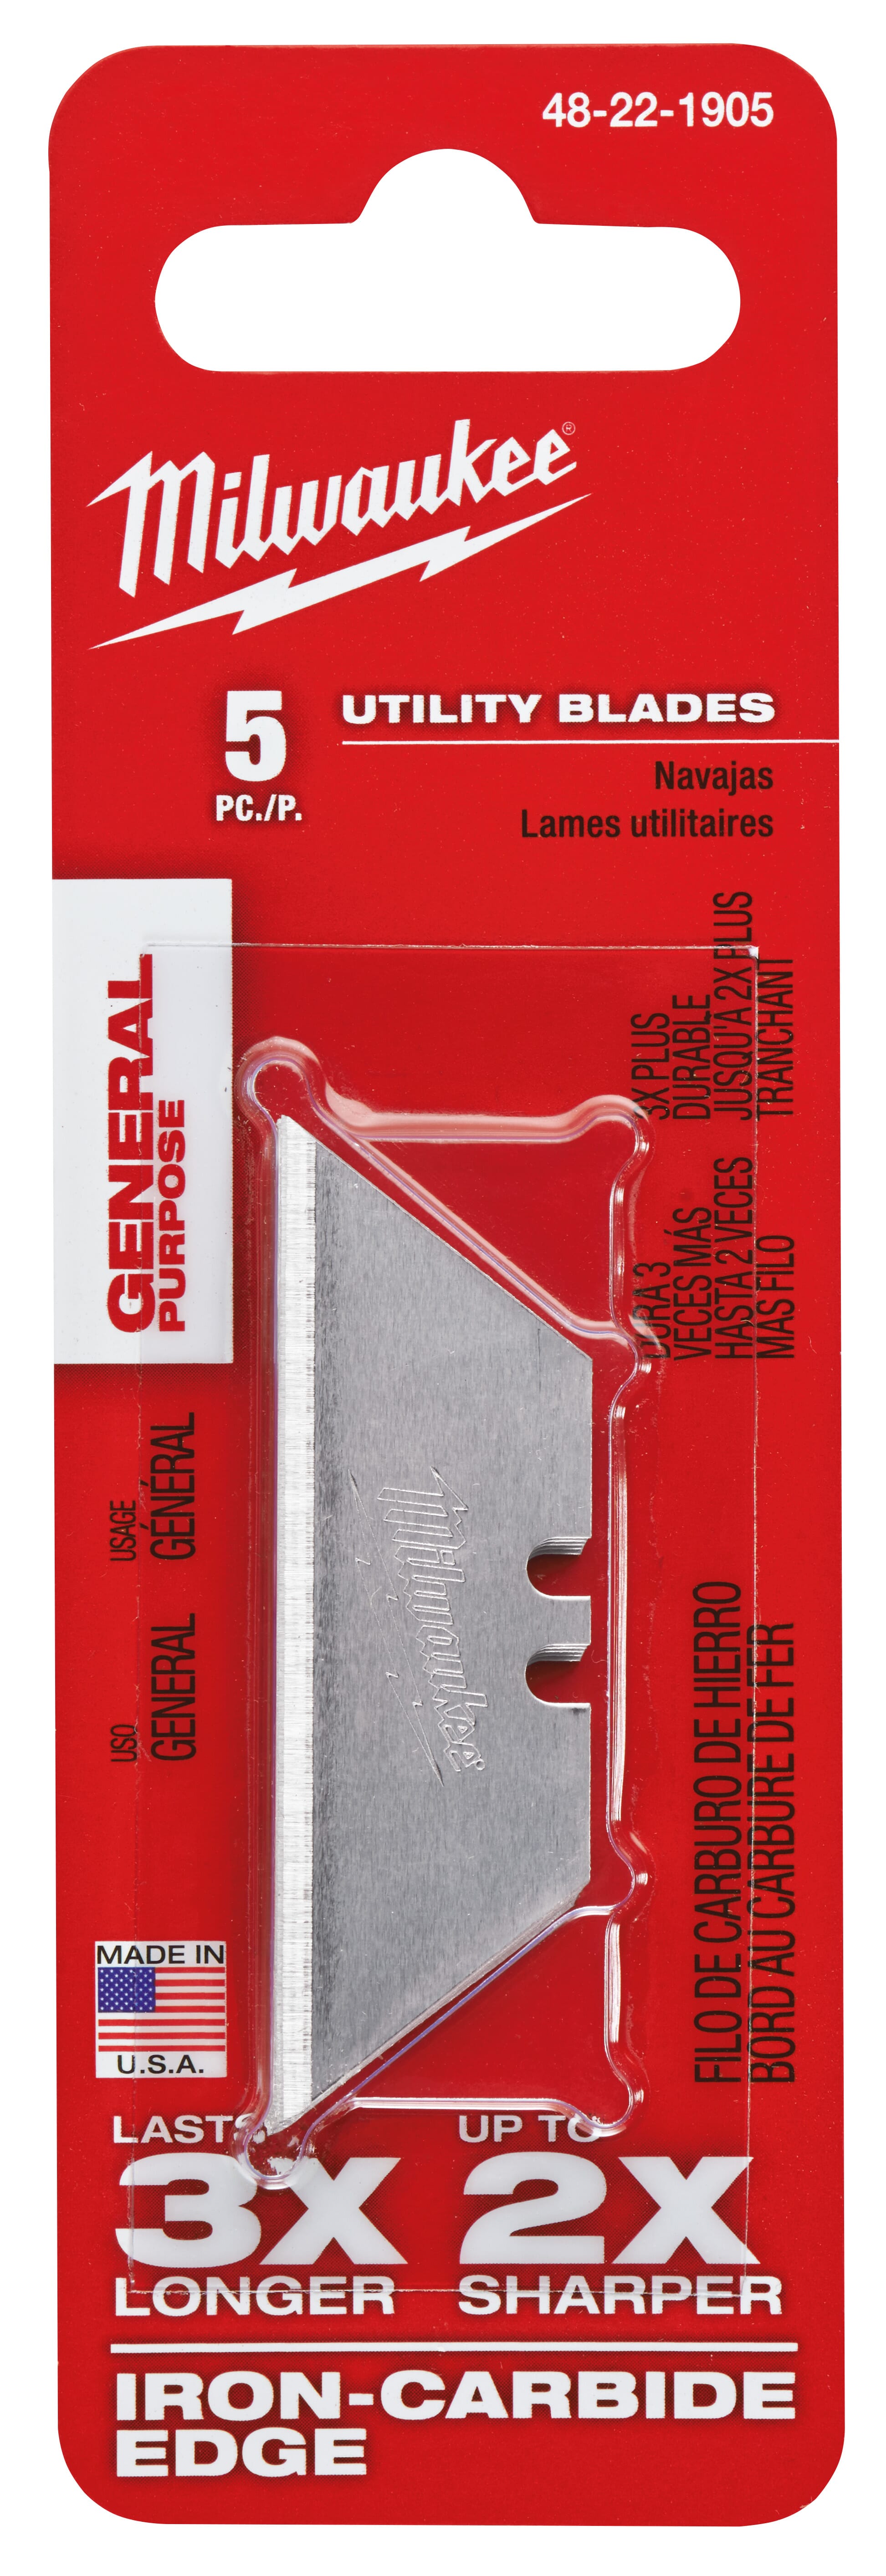 Milwaukee® 48-22-1905 5-Piece General Purpose Utility Blade, Micro Carbide Metal, Sharp Point/Straight Edge, 2-3/8 in L x 3/4 in W Blade, Compatible With: Milwaukee® Most Standard Utility Knives, 0.025 in THK